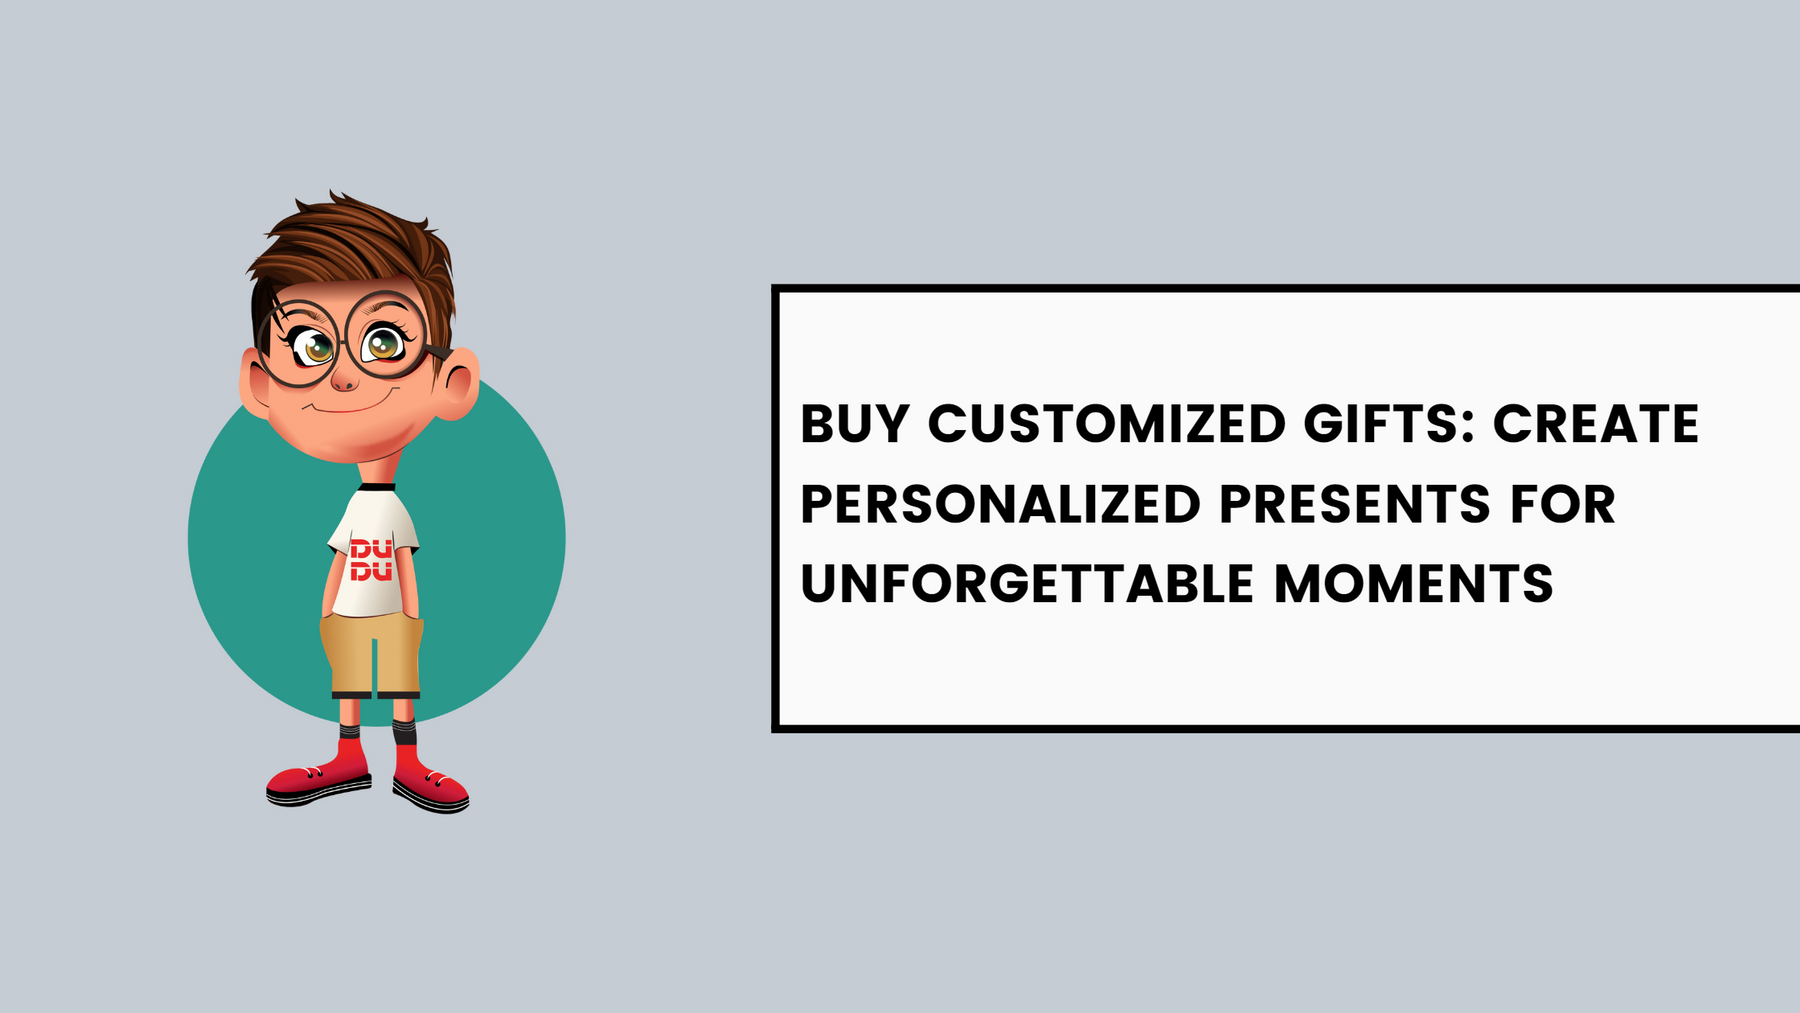 Buy Customized Gifts: Create Personalized Presents for Unforgettable Moments